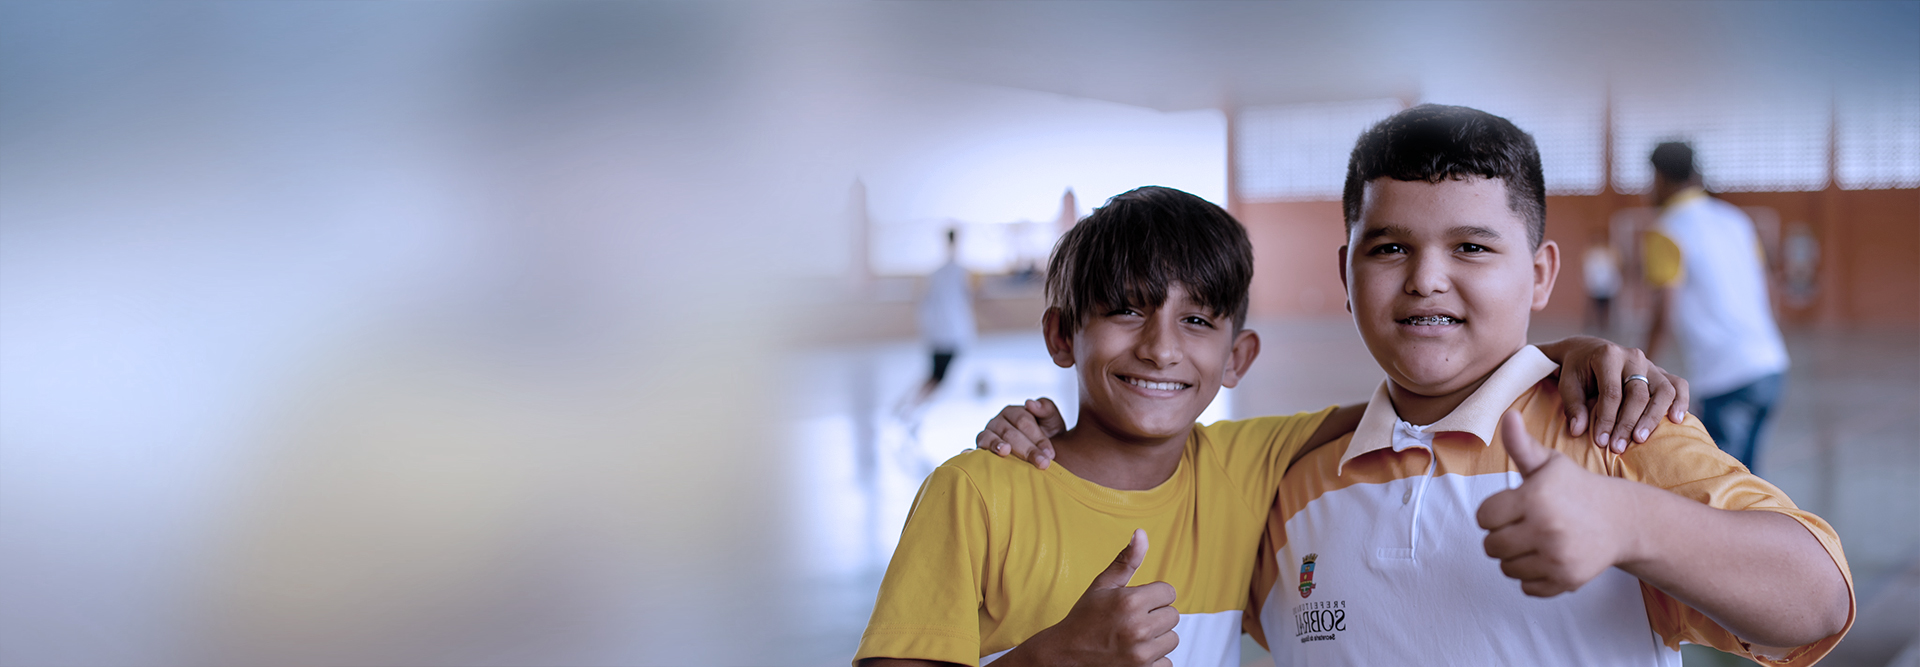 Two boys giving thumbs up in a gym, supporting education.